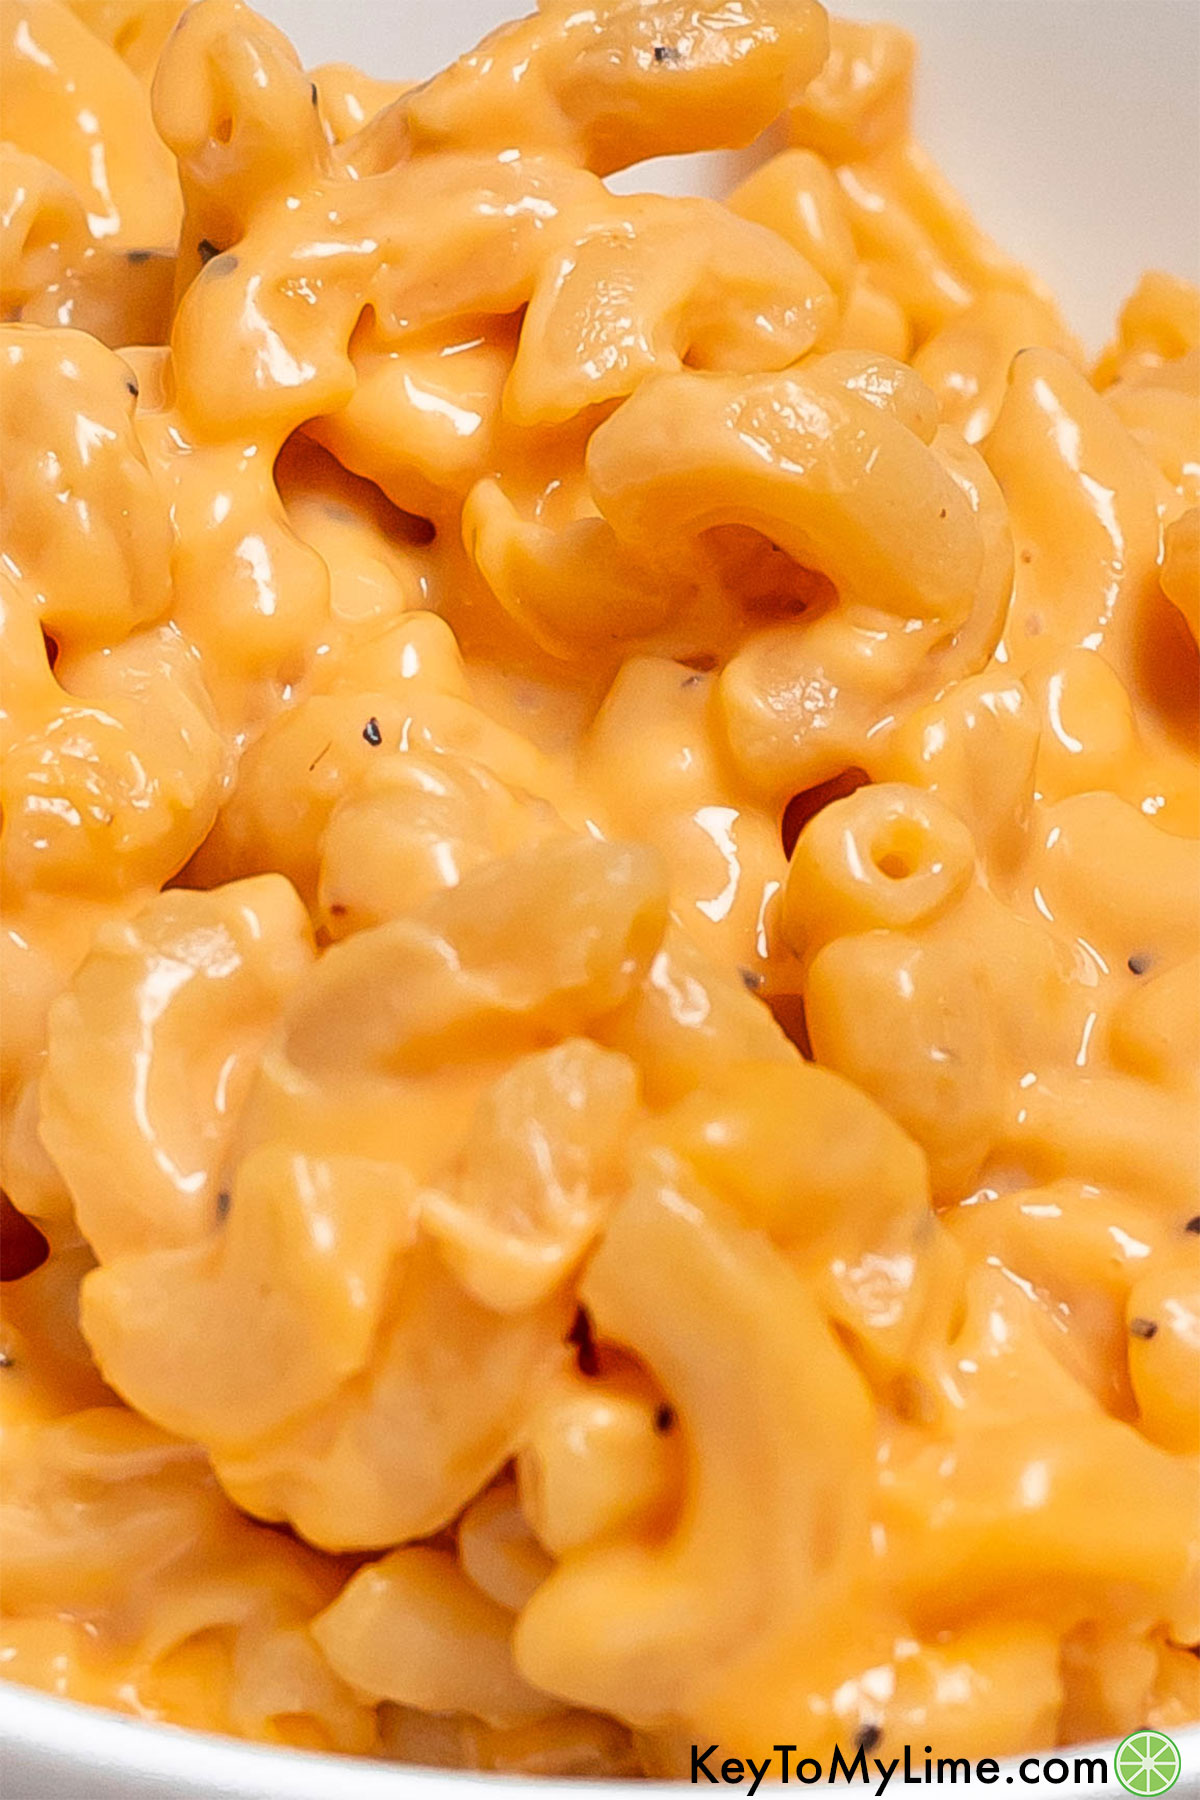 A close up showing the cheesy creamy texture of the mac and cheese pasta.